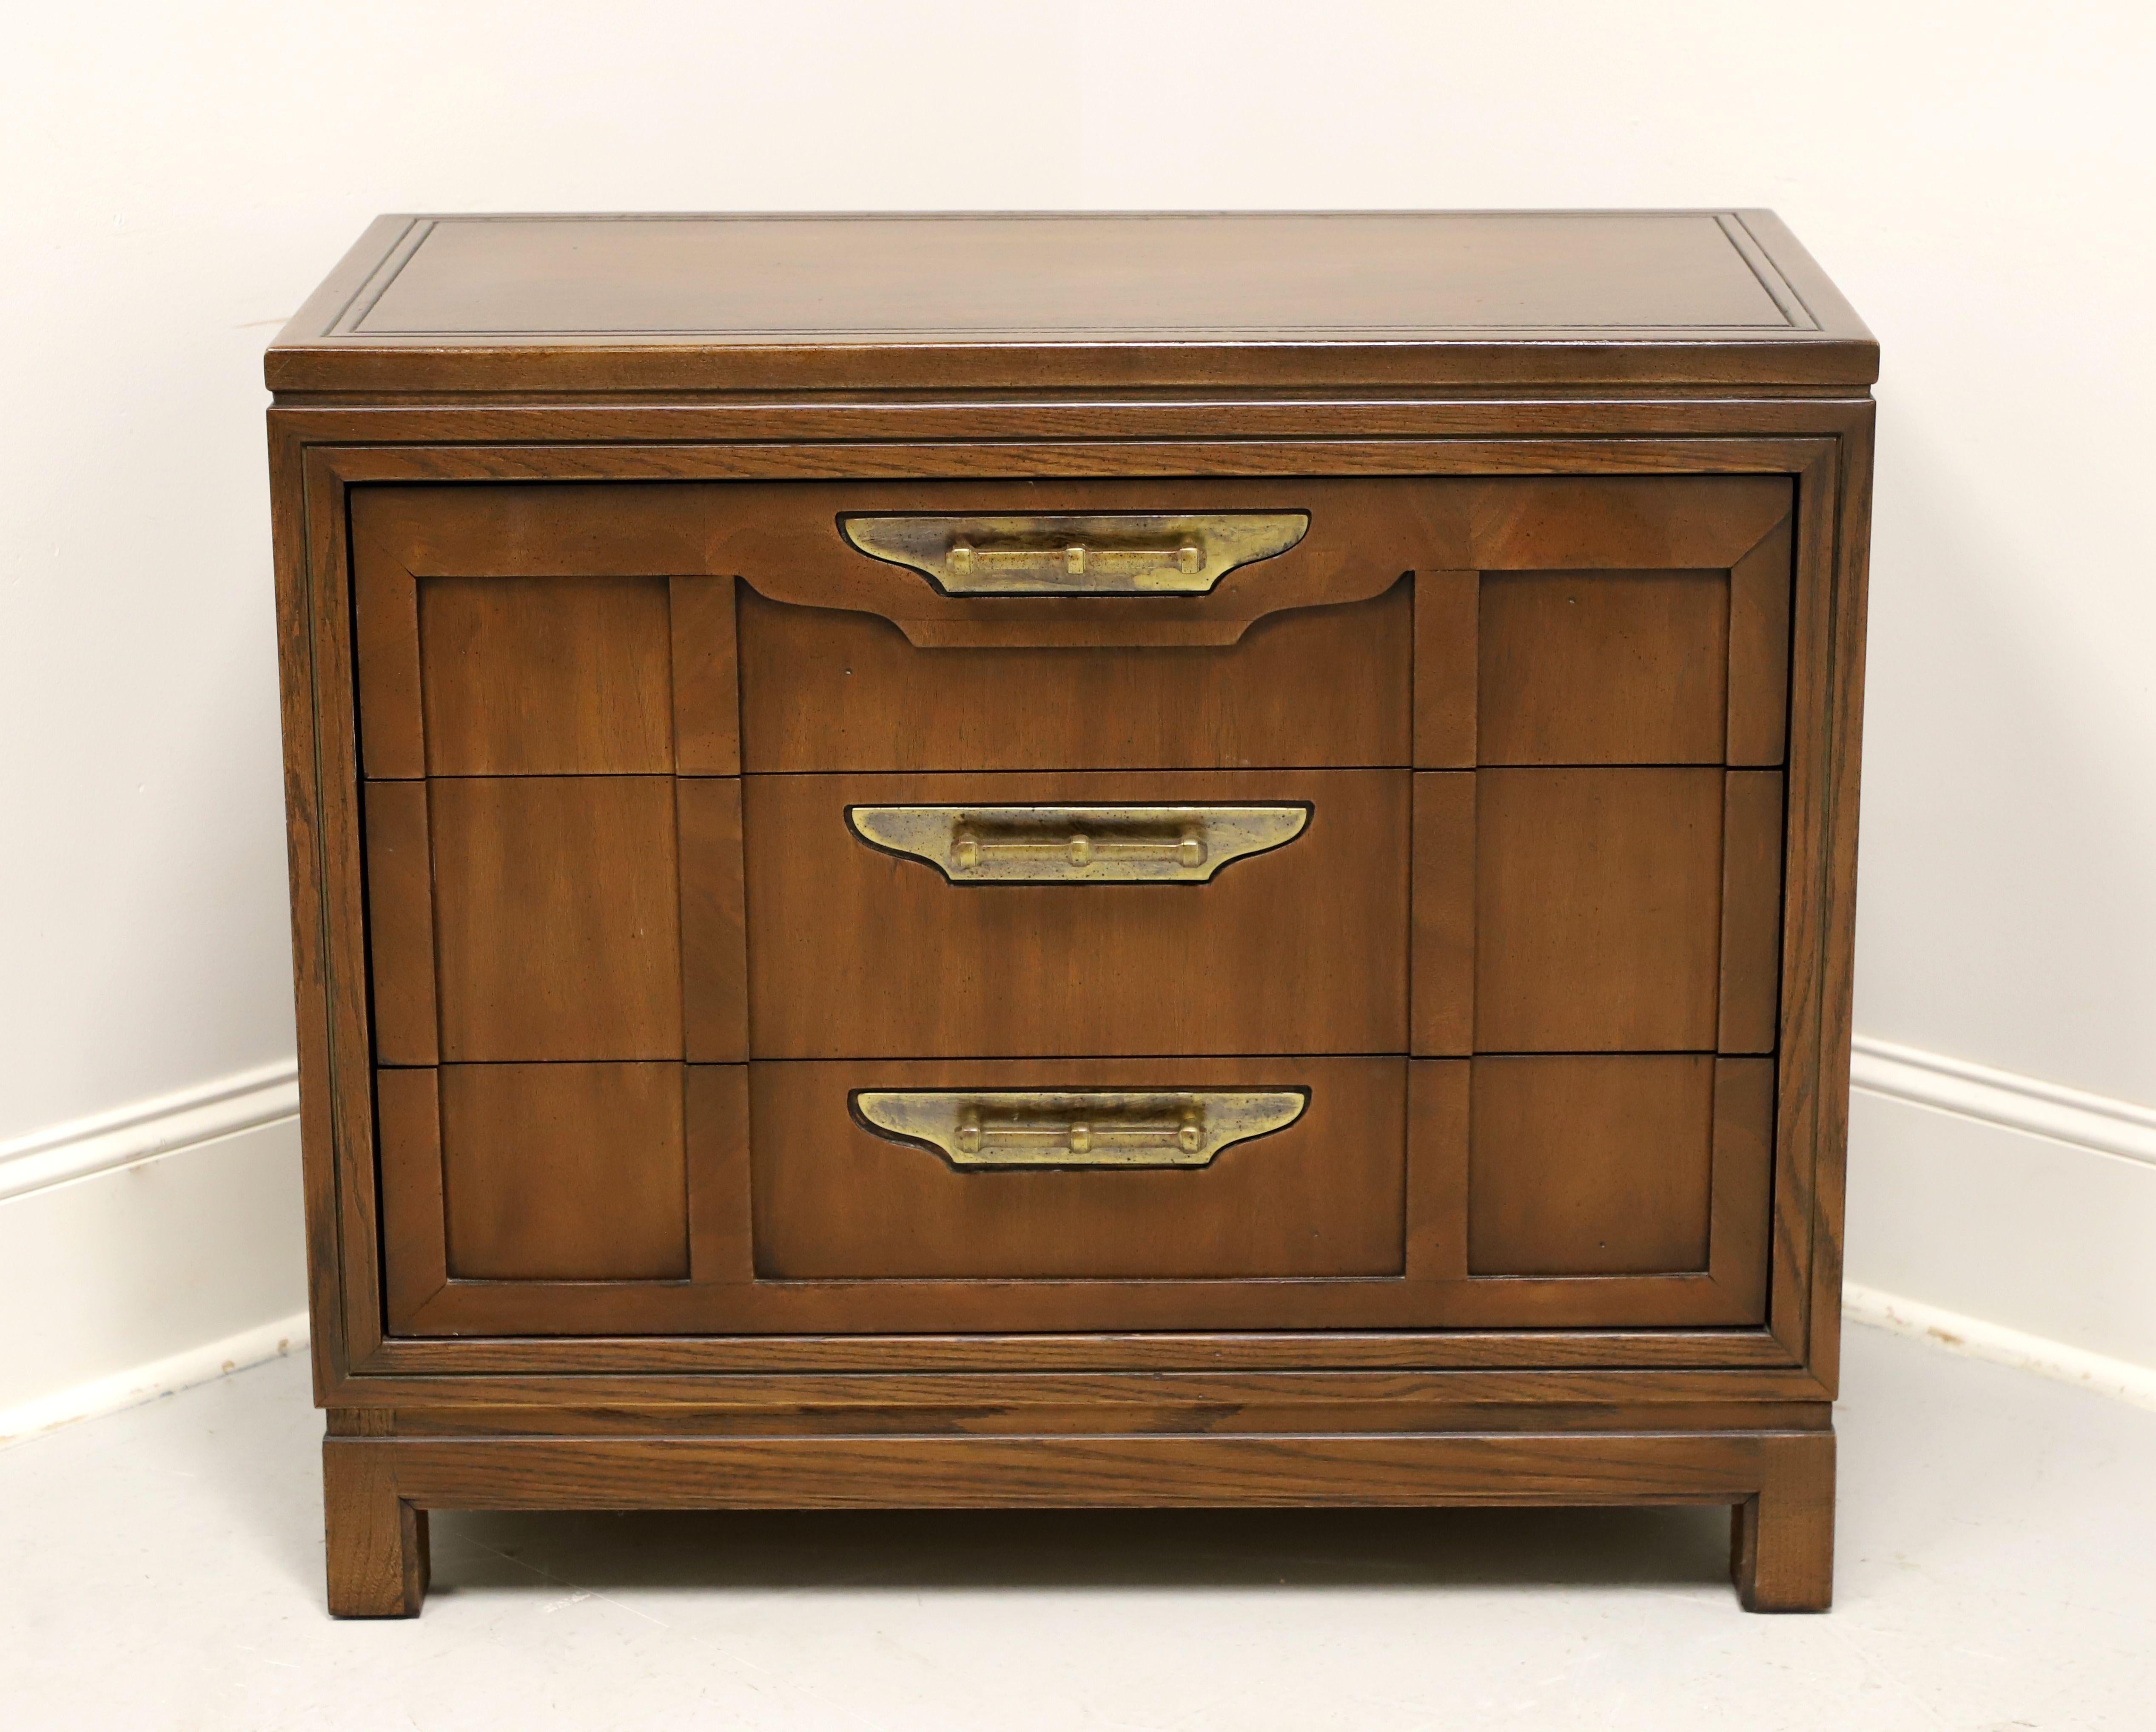 An Asian influenced bachelor chest by Fancher Furniture. Oak with walnut top, drawer fronts & sides, brass hardware, banded top with a solid edge, and block feet. Features three drawers of dovetail construction. Made in Salamanca, New York, USA, in